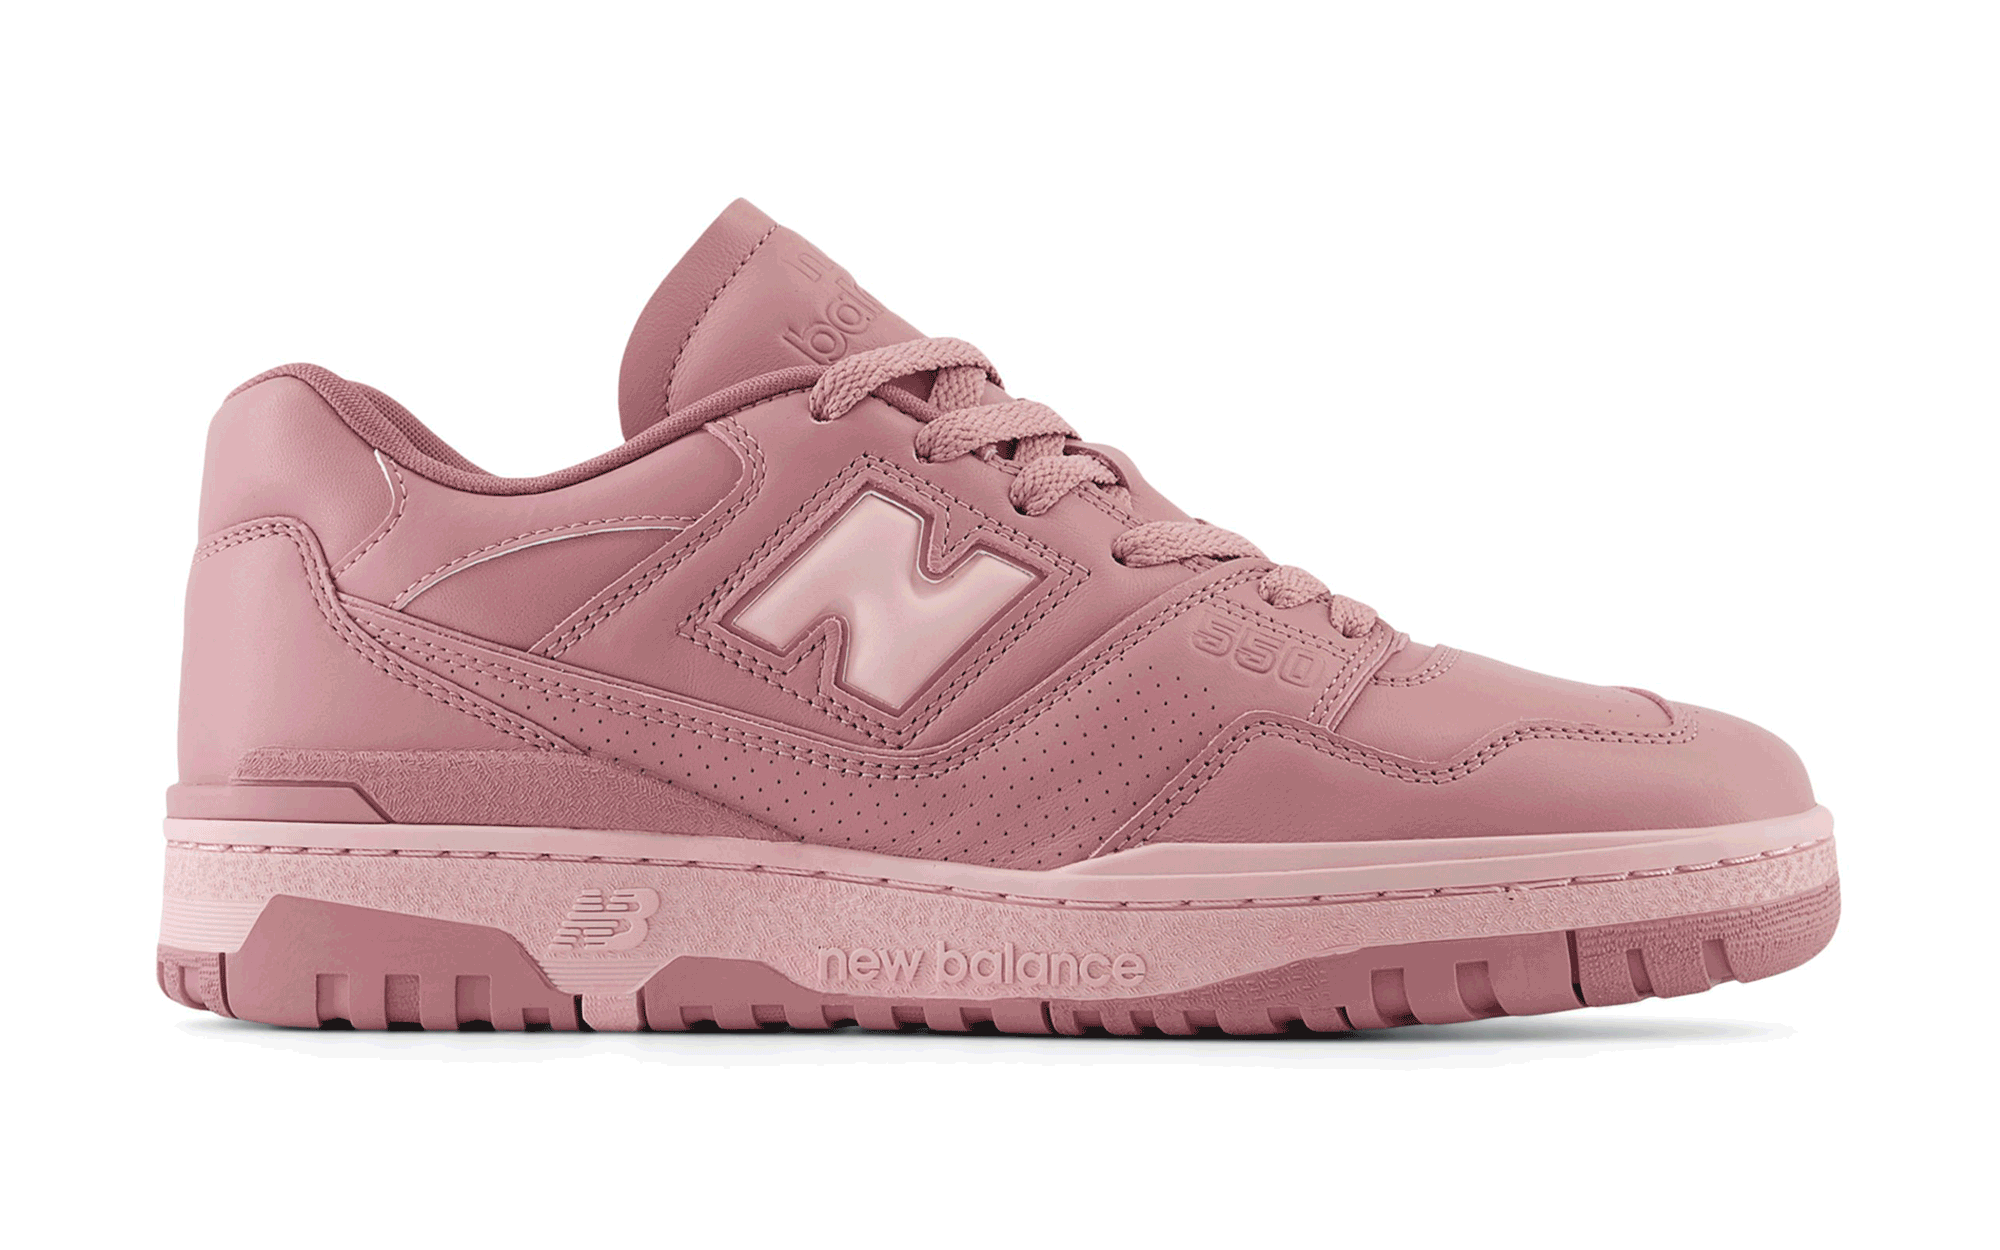 Available Now // New Balance 550 "Monochromatic Pack"